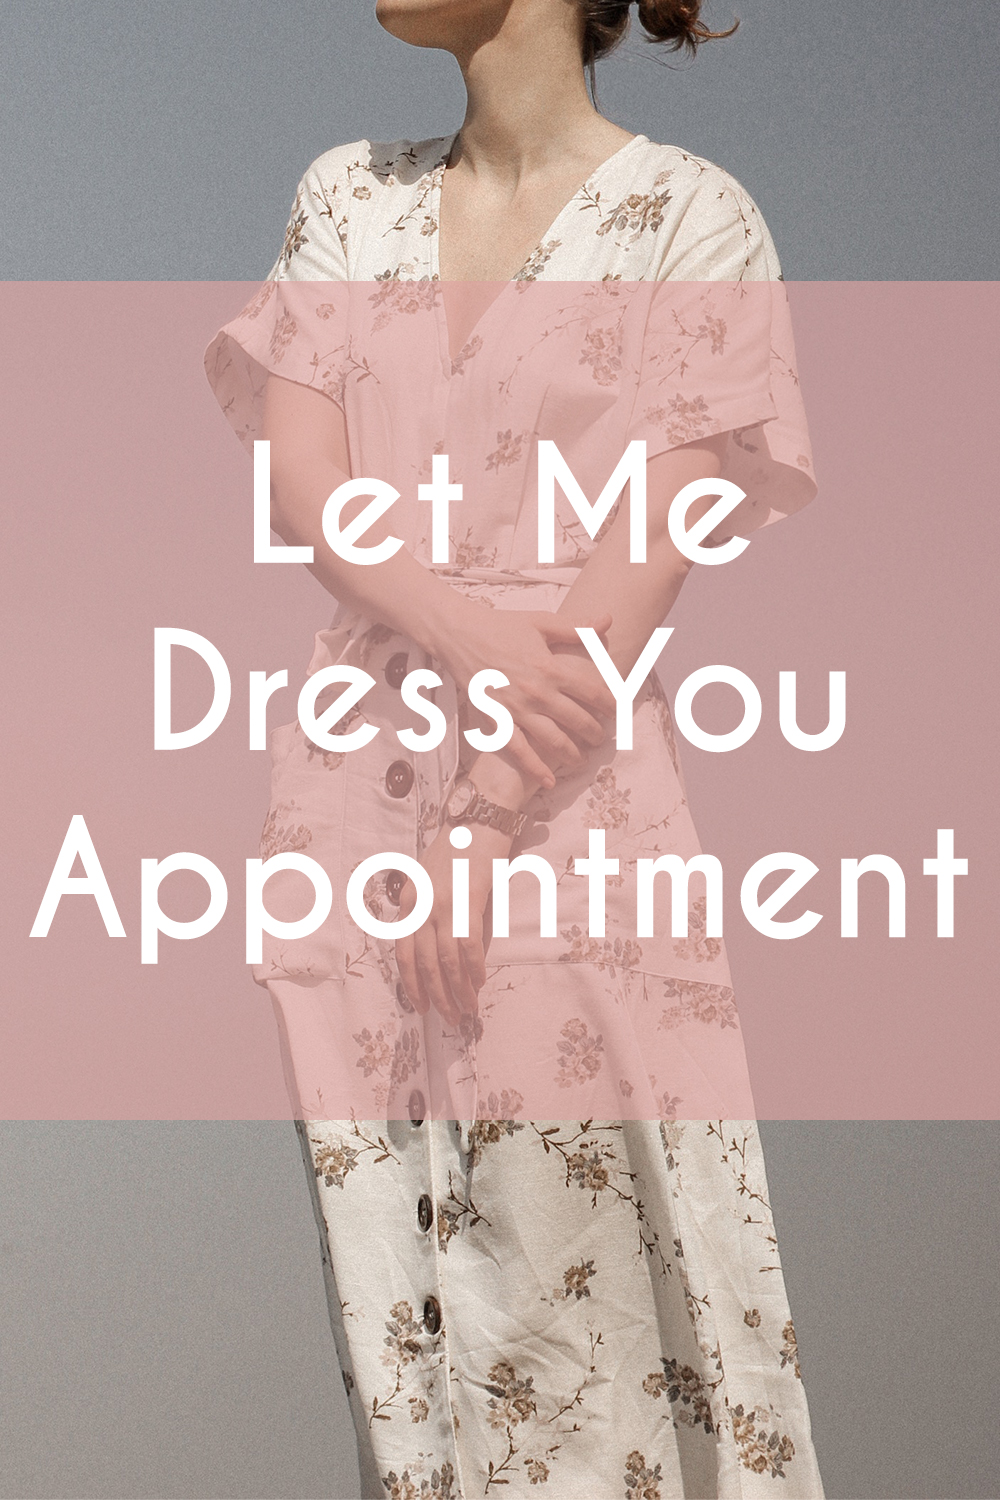 Let Me Dress You Appointments